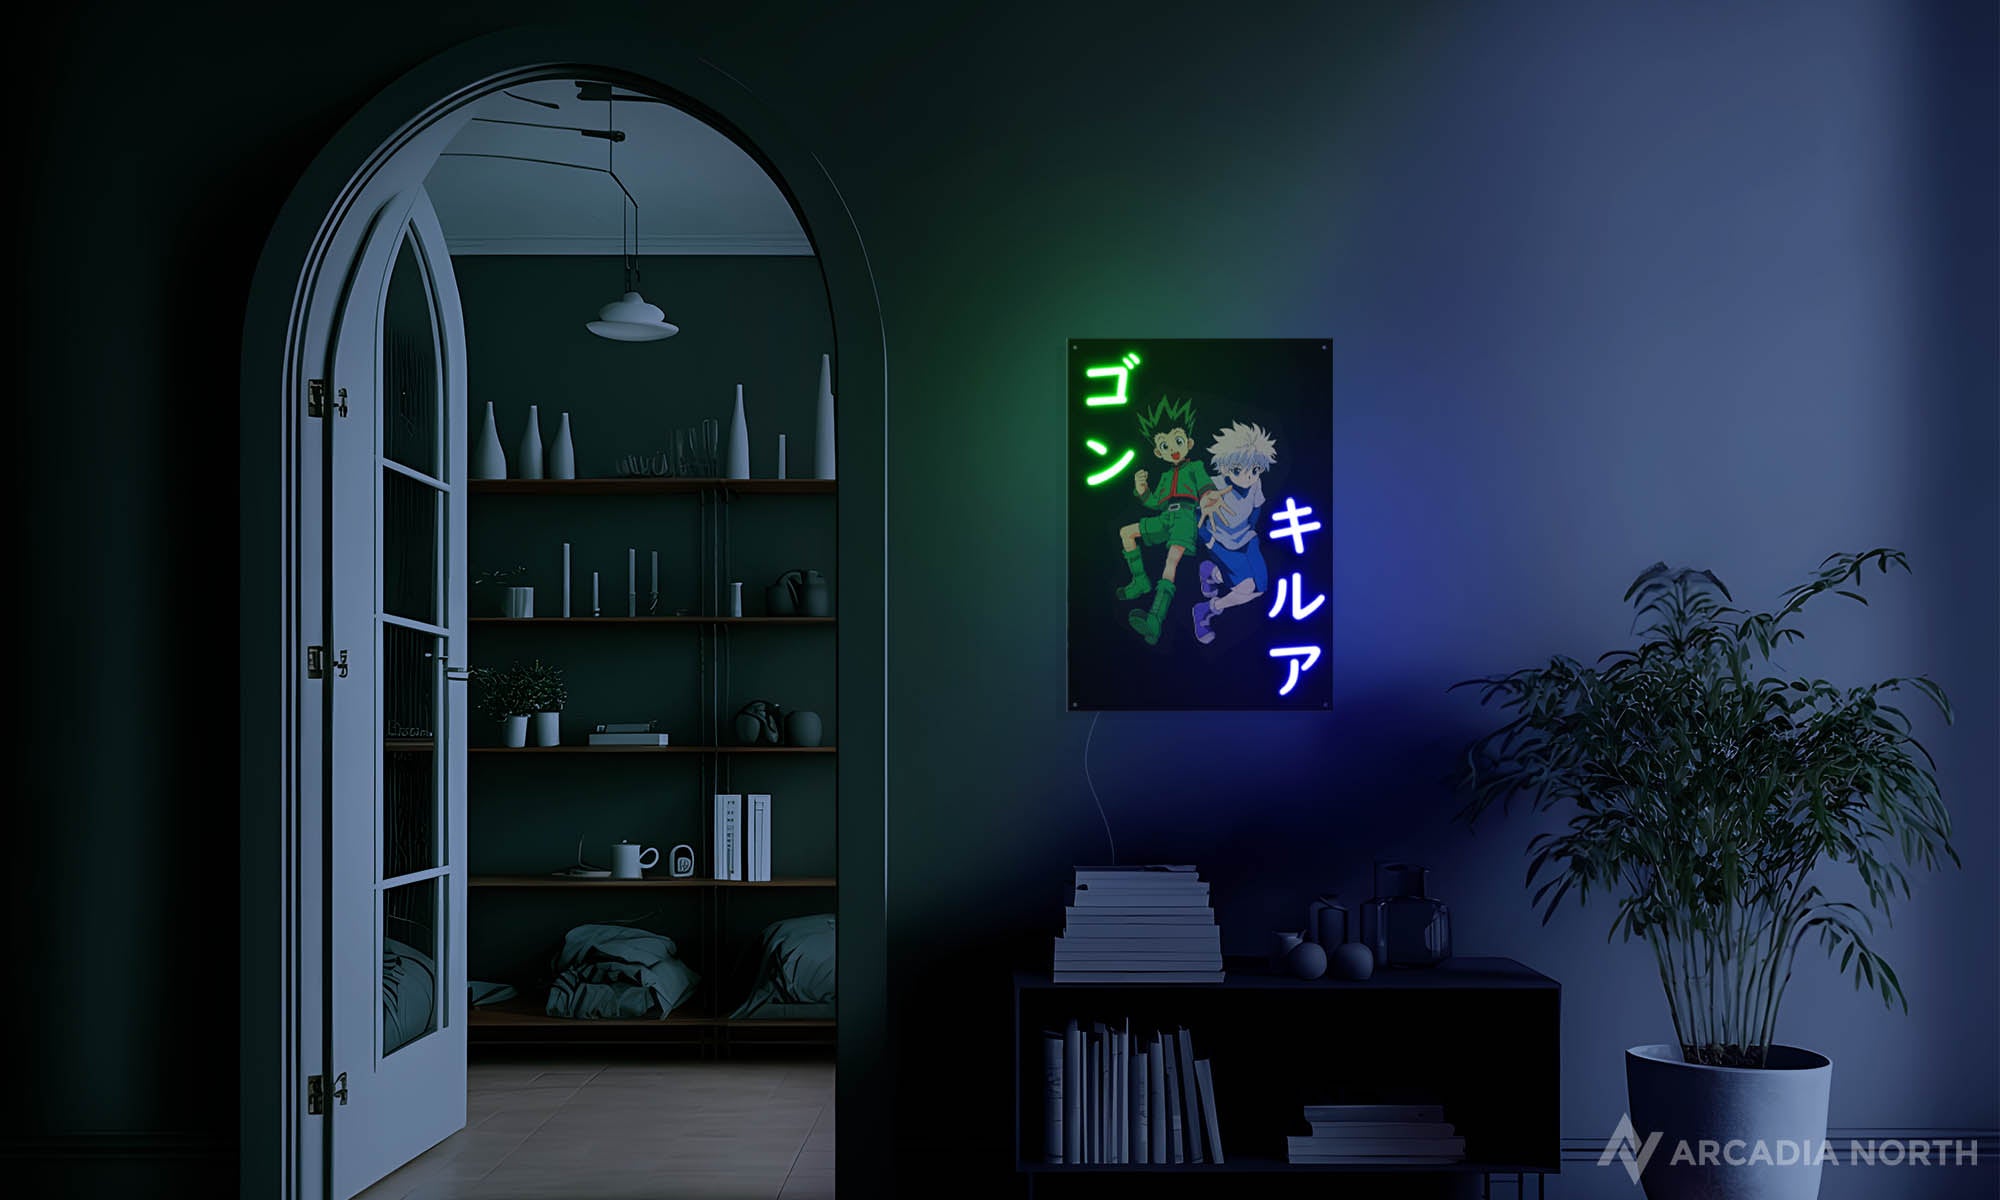 Arcadia North Original LED Poster featuring the anime Hunter x Hunter with Gon and Killua and their names written in Japanese Katakana. Illuminated by LED neon lights. UV-printed poster on acrylic.